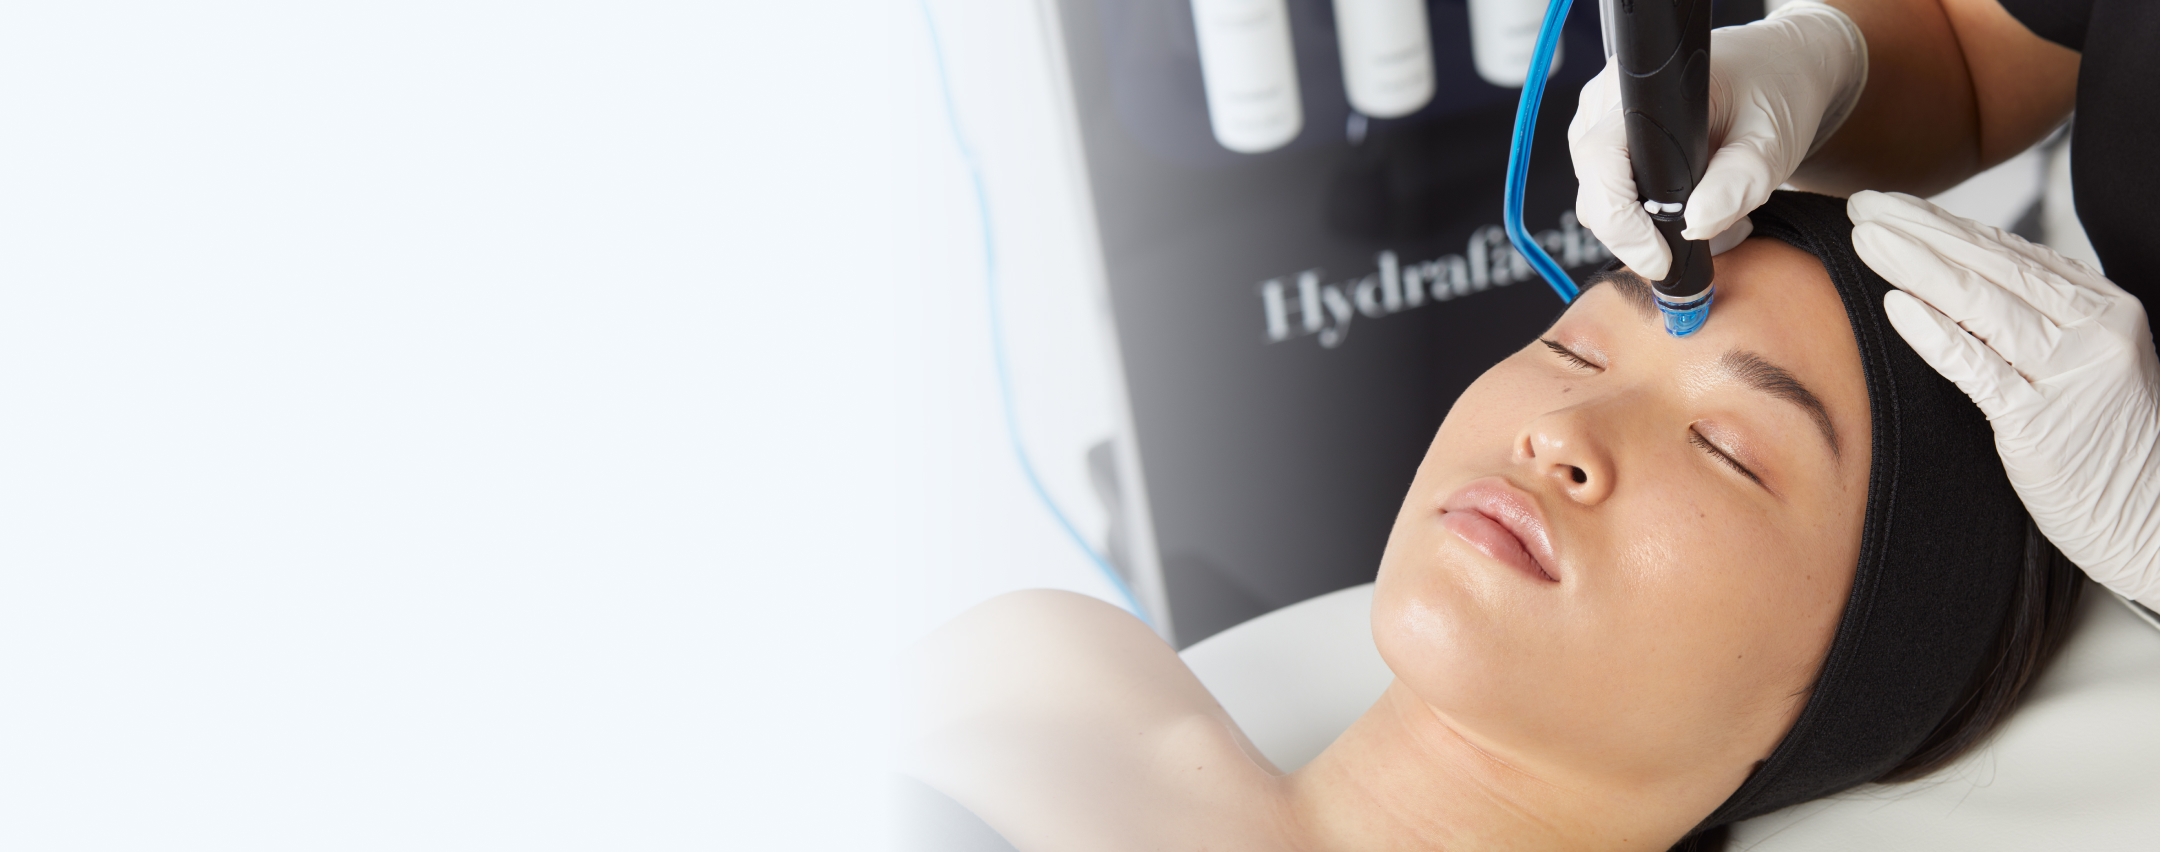 Why We Love The Hydrafacial Syndeo